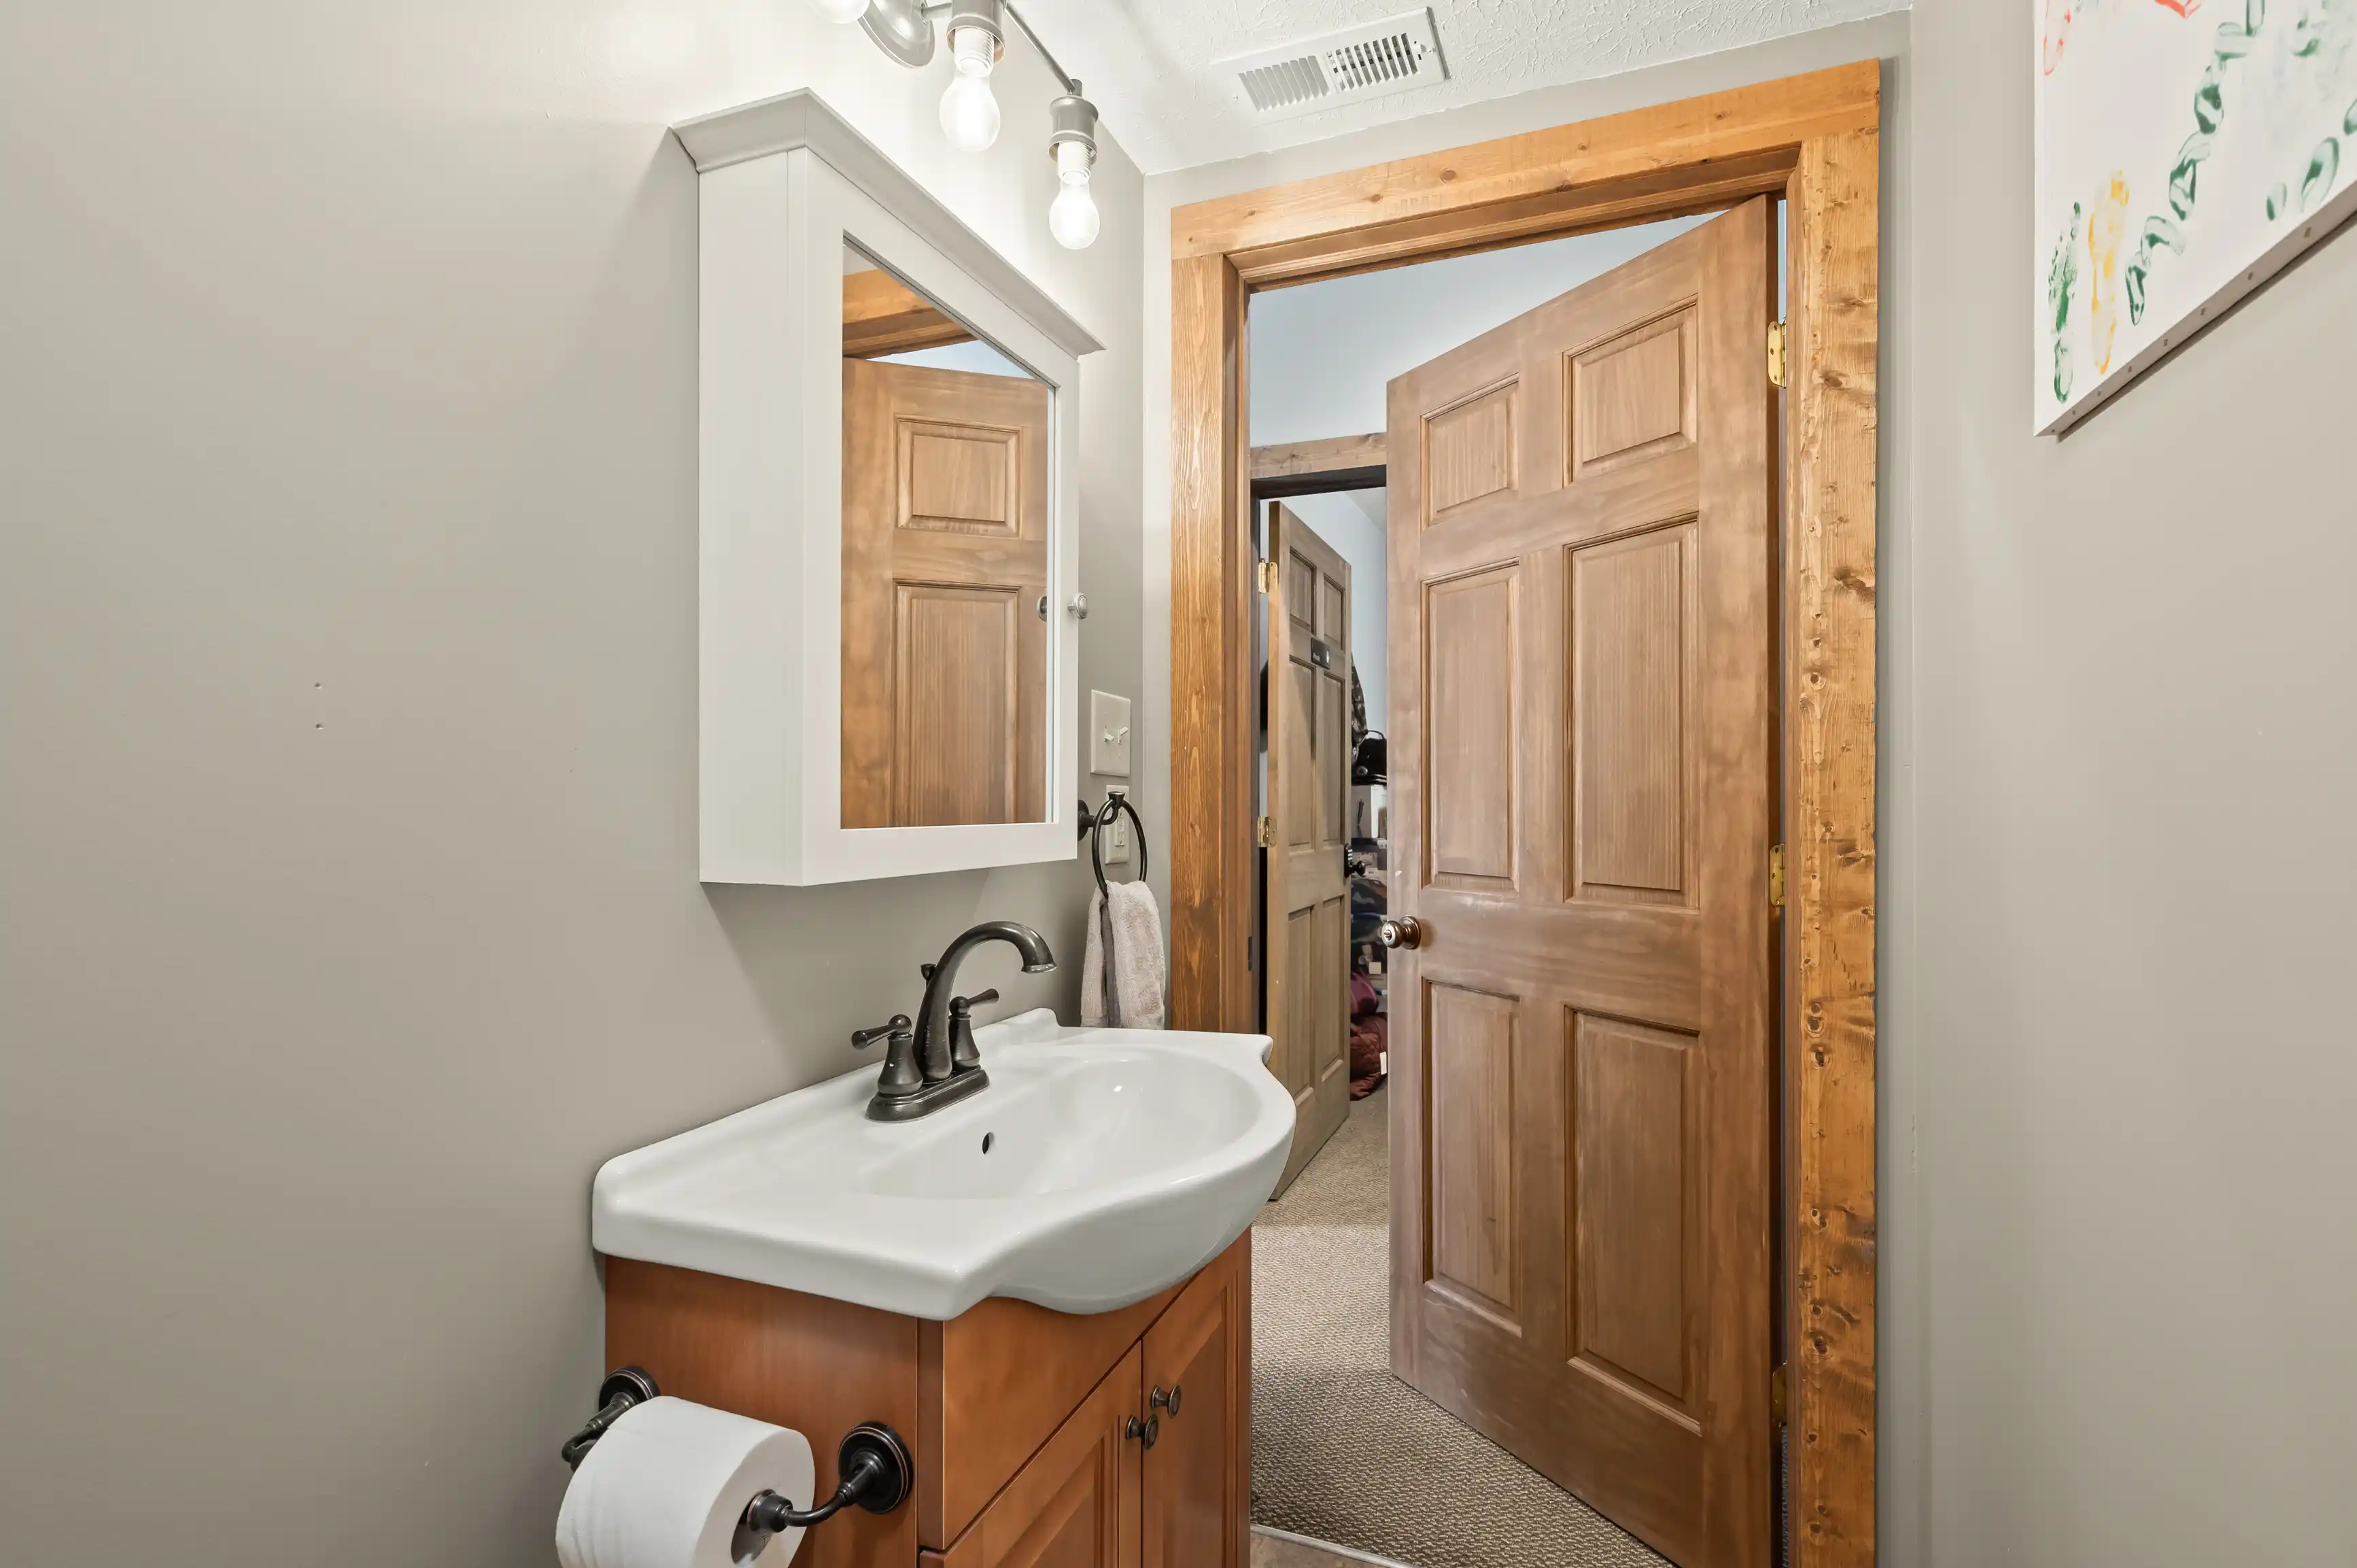 Interior of a well-lit bathroom featuring a wooden cabinet with a sink, a mirrored medicine cabinet above, and an open wooden door leading to another room.